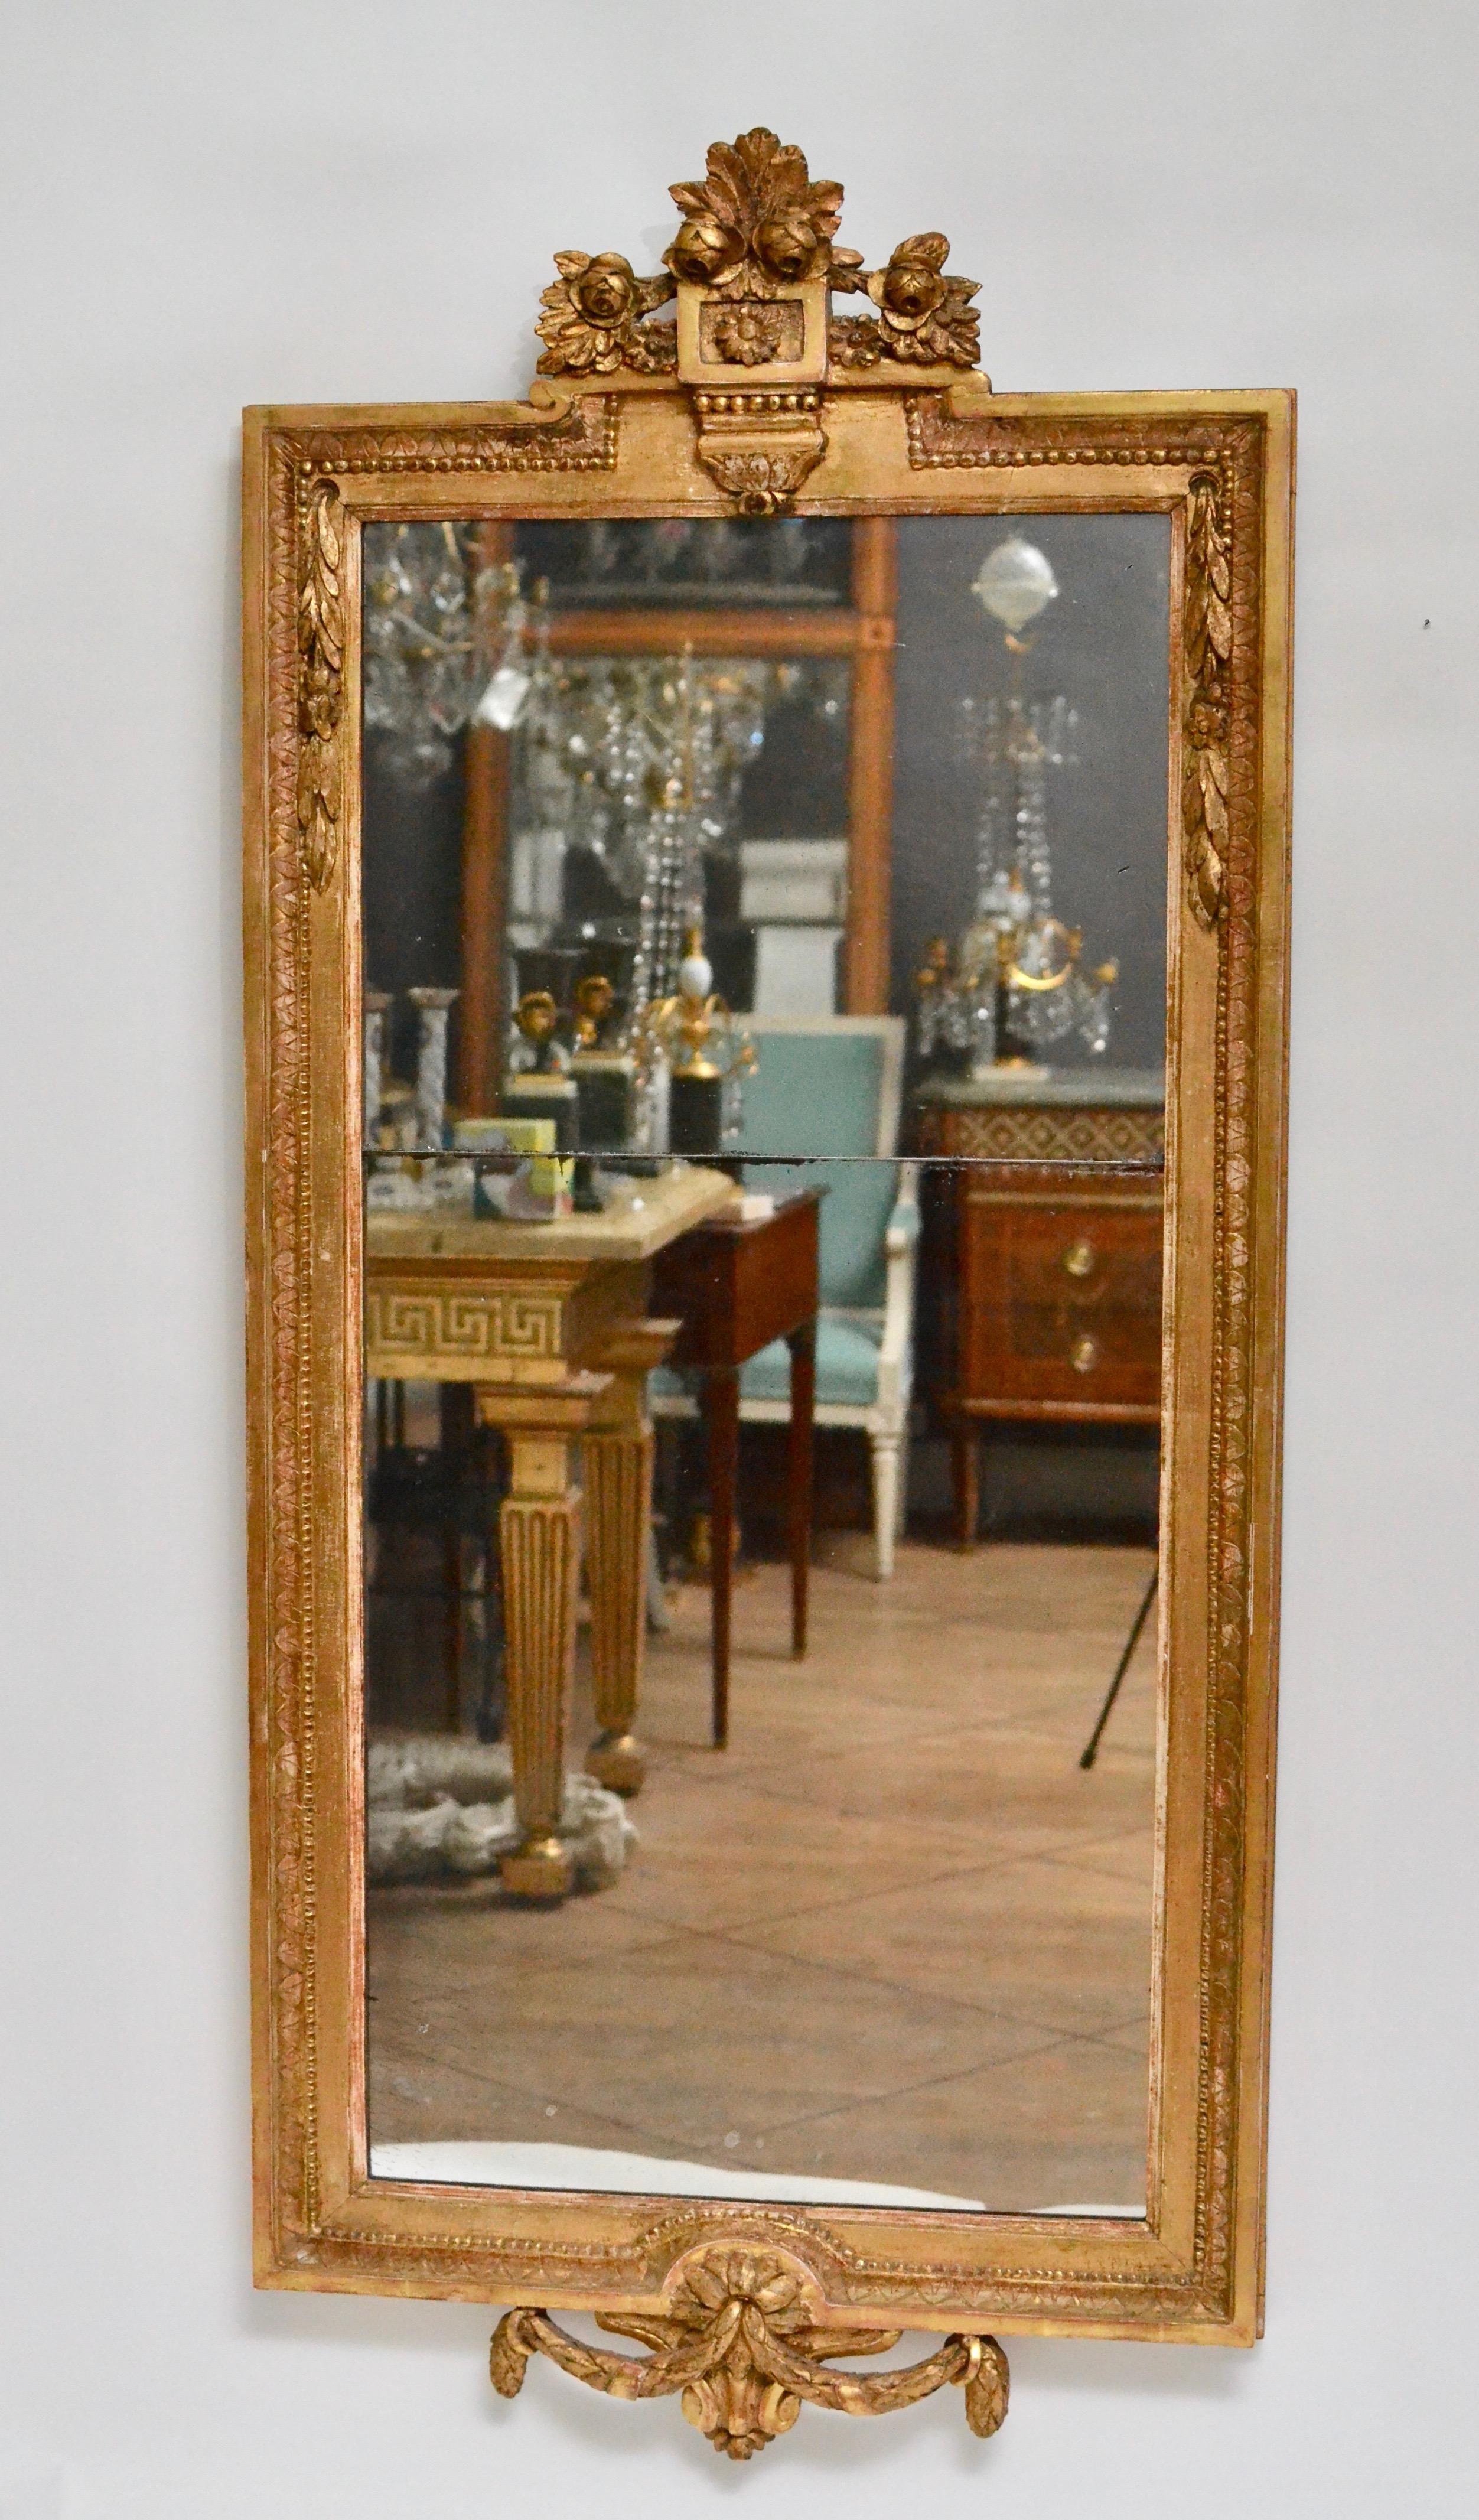 Gustavian carved giltwood mirror made in Stockholm circa 1780. Attributed to Johan Åkerblad, (master 1758-1799).